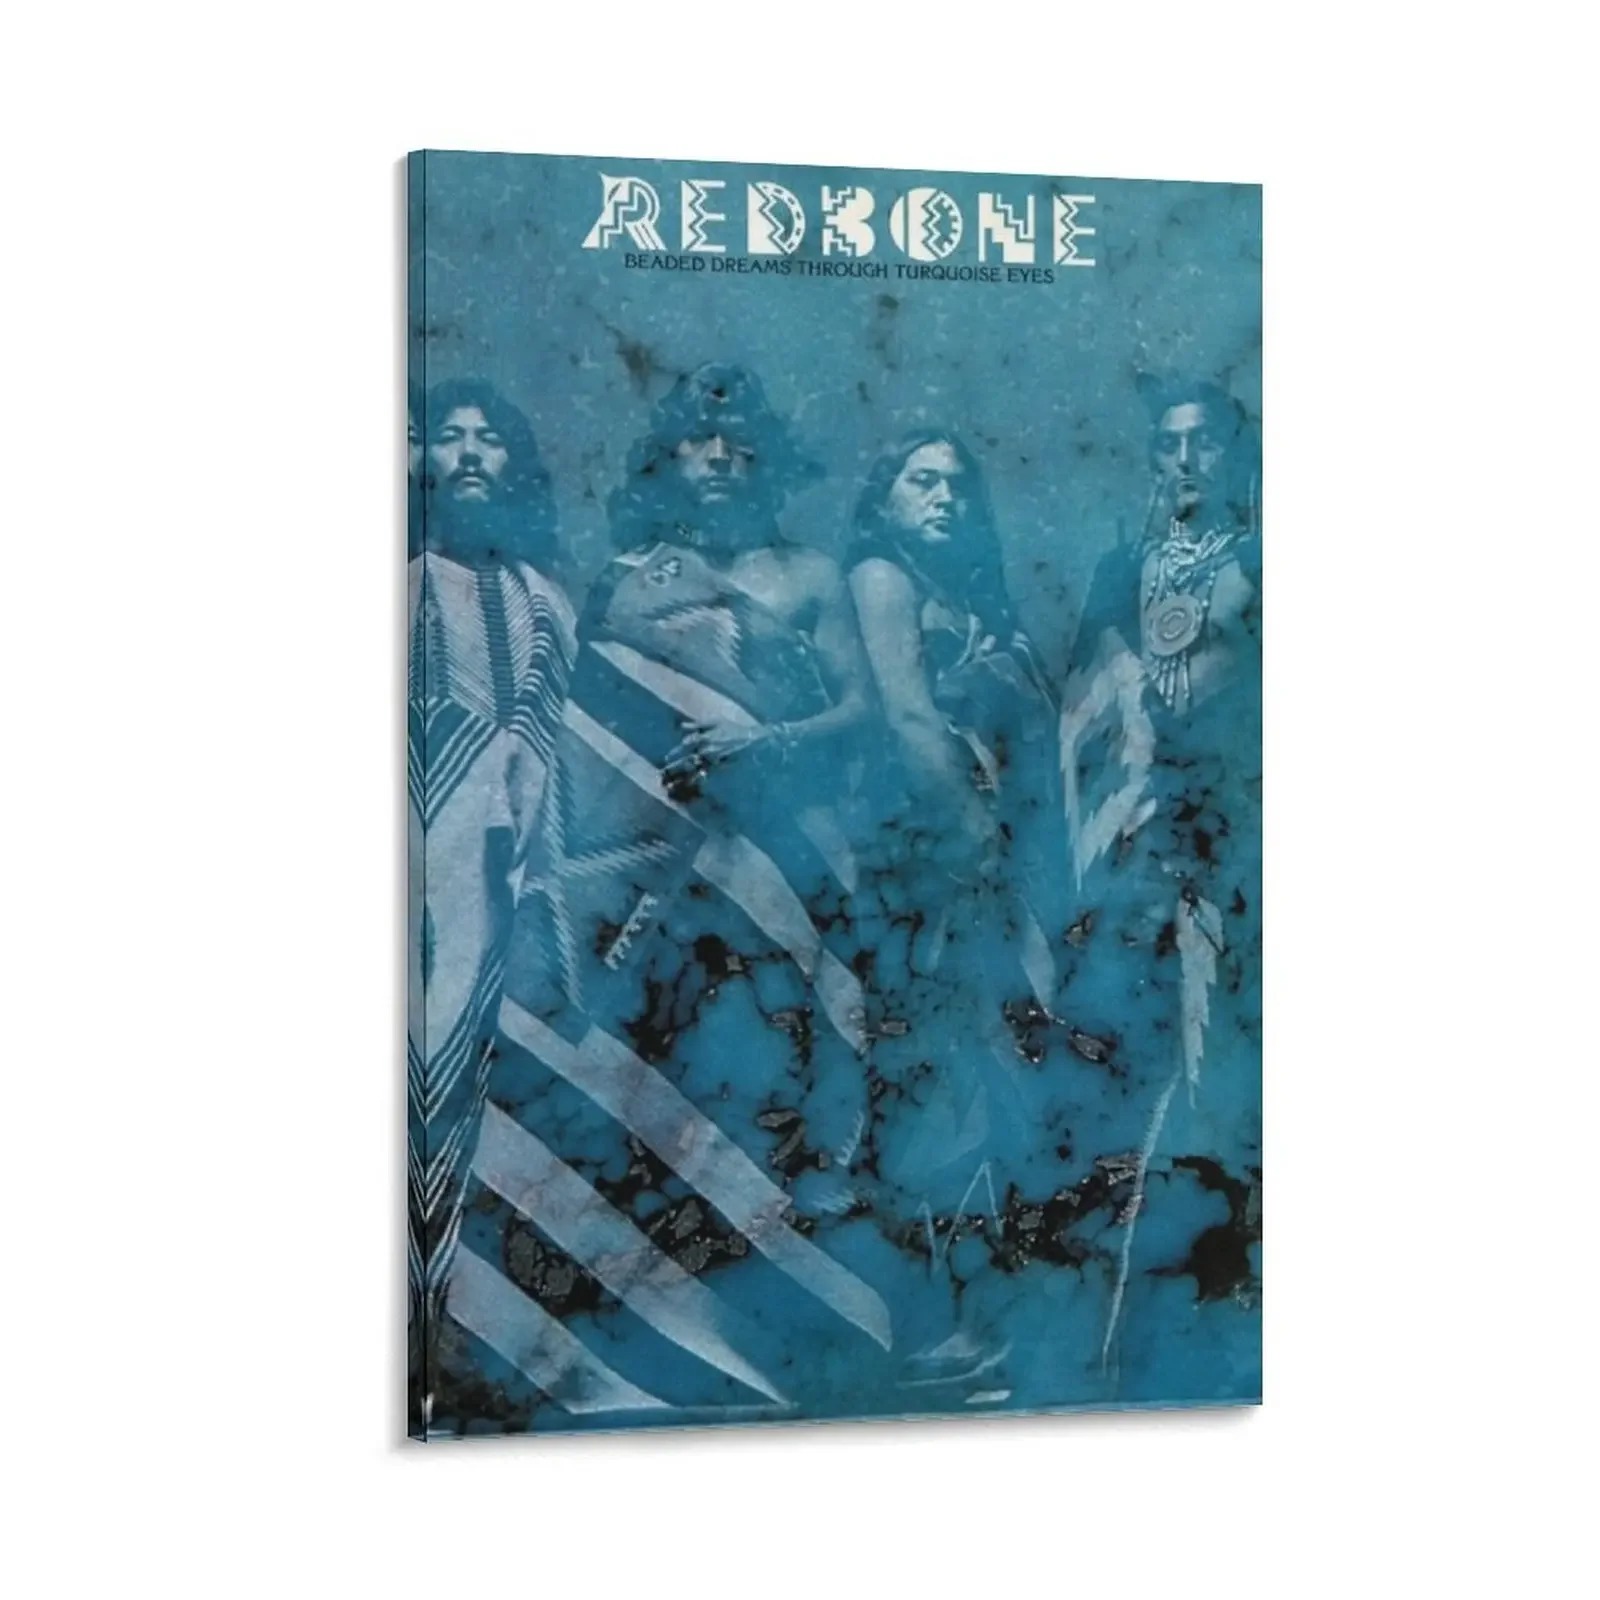 

Redbone: Beaded Dreams Through Turquoise Eyes Canvas Painting anime room decorations aesthetic Paintings